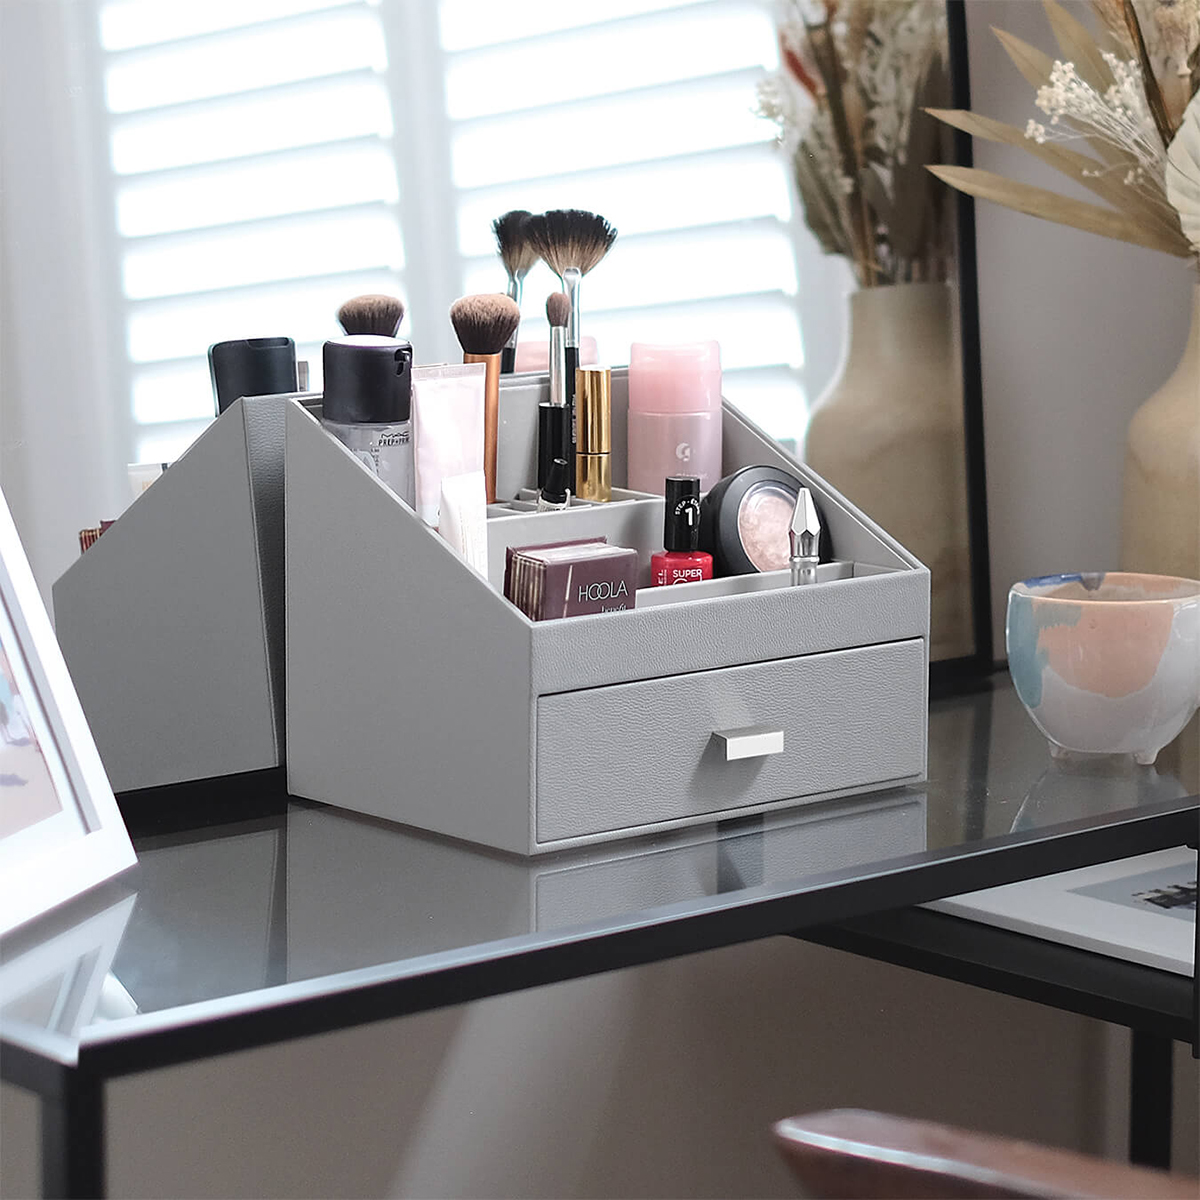 Stackers Makeup Organizer | The Container Store